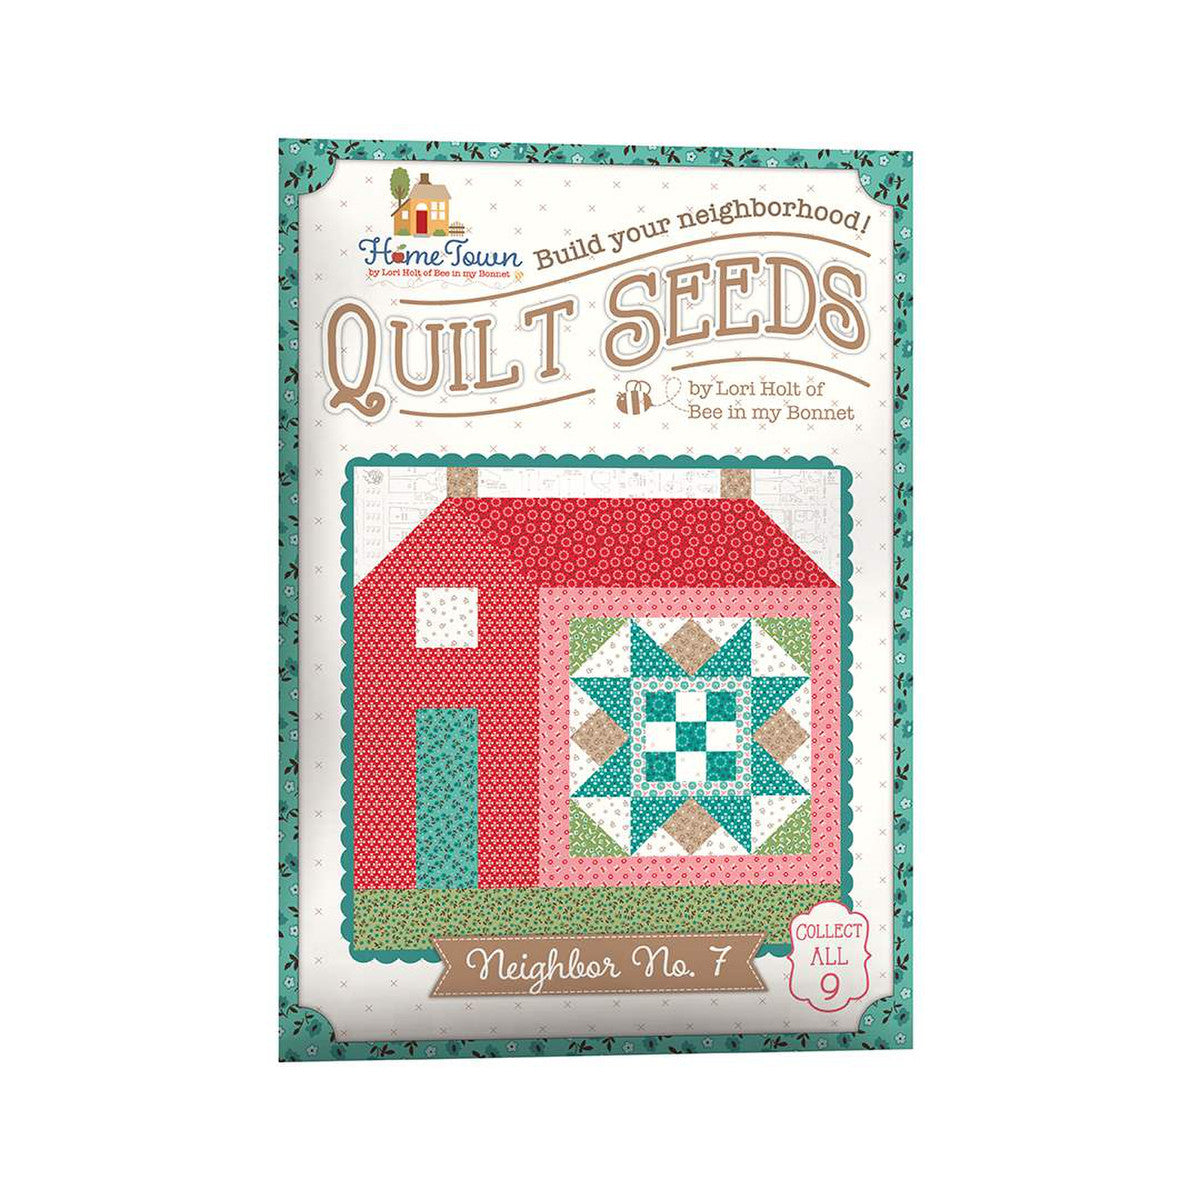 Lori Holt Quilt Seeds™ Pattern Home Town Neighbor No. 1 – Starlit Quilts